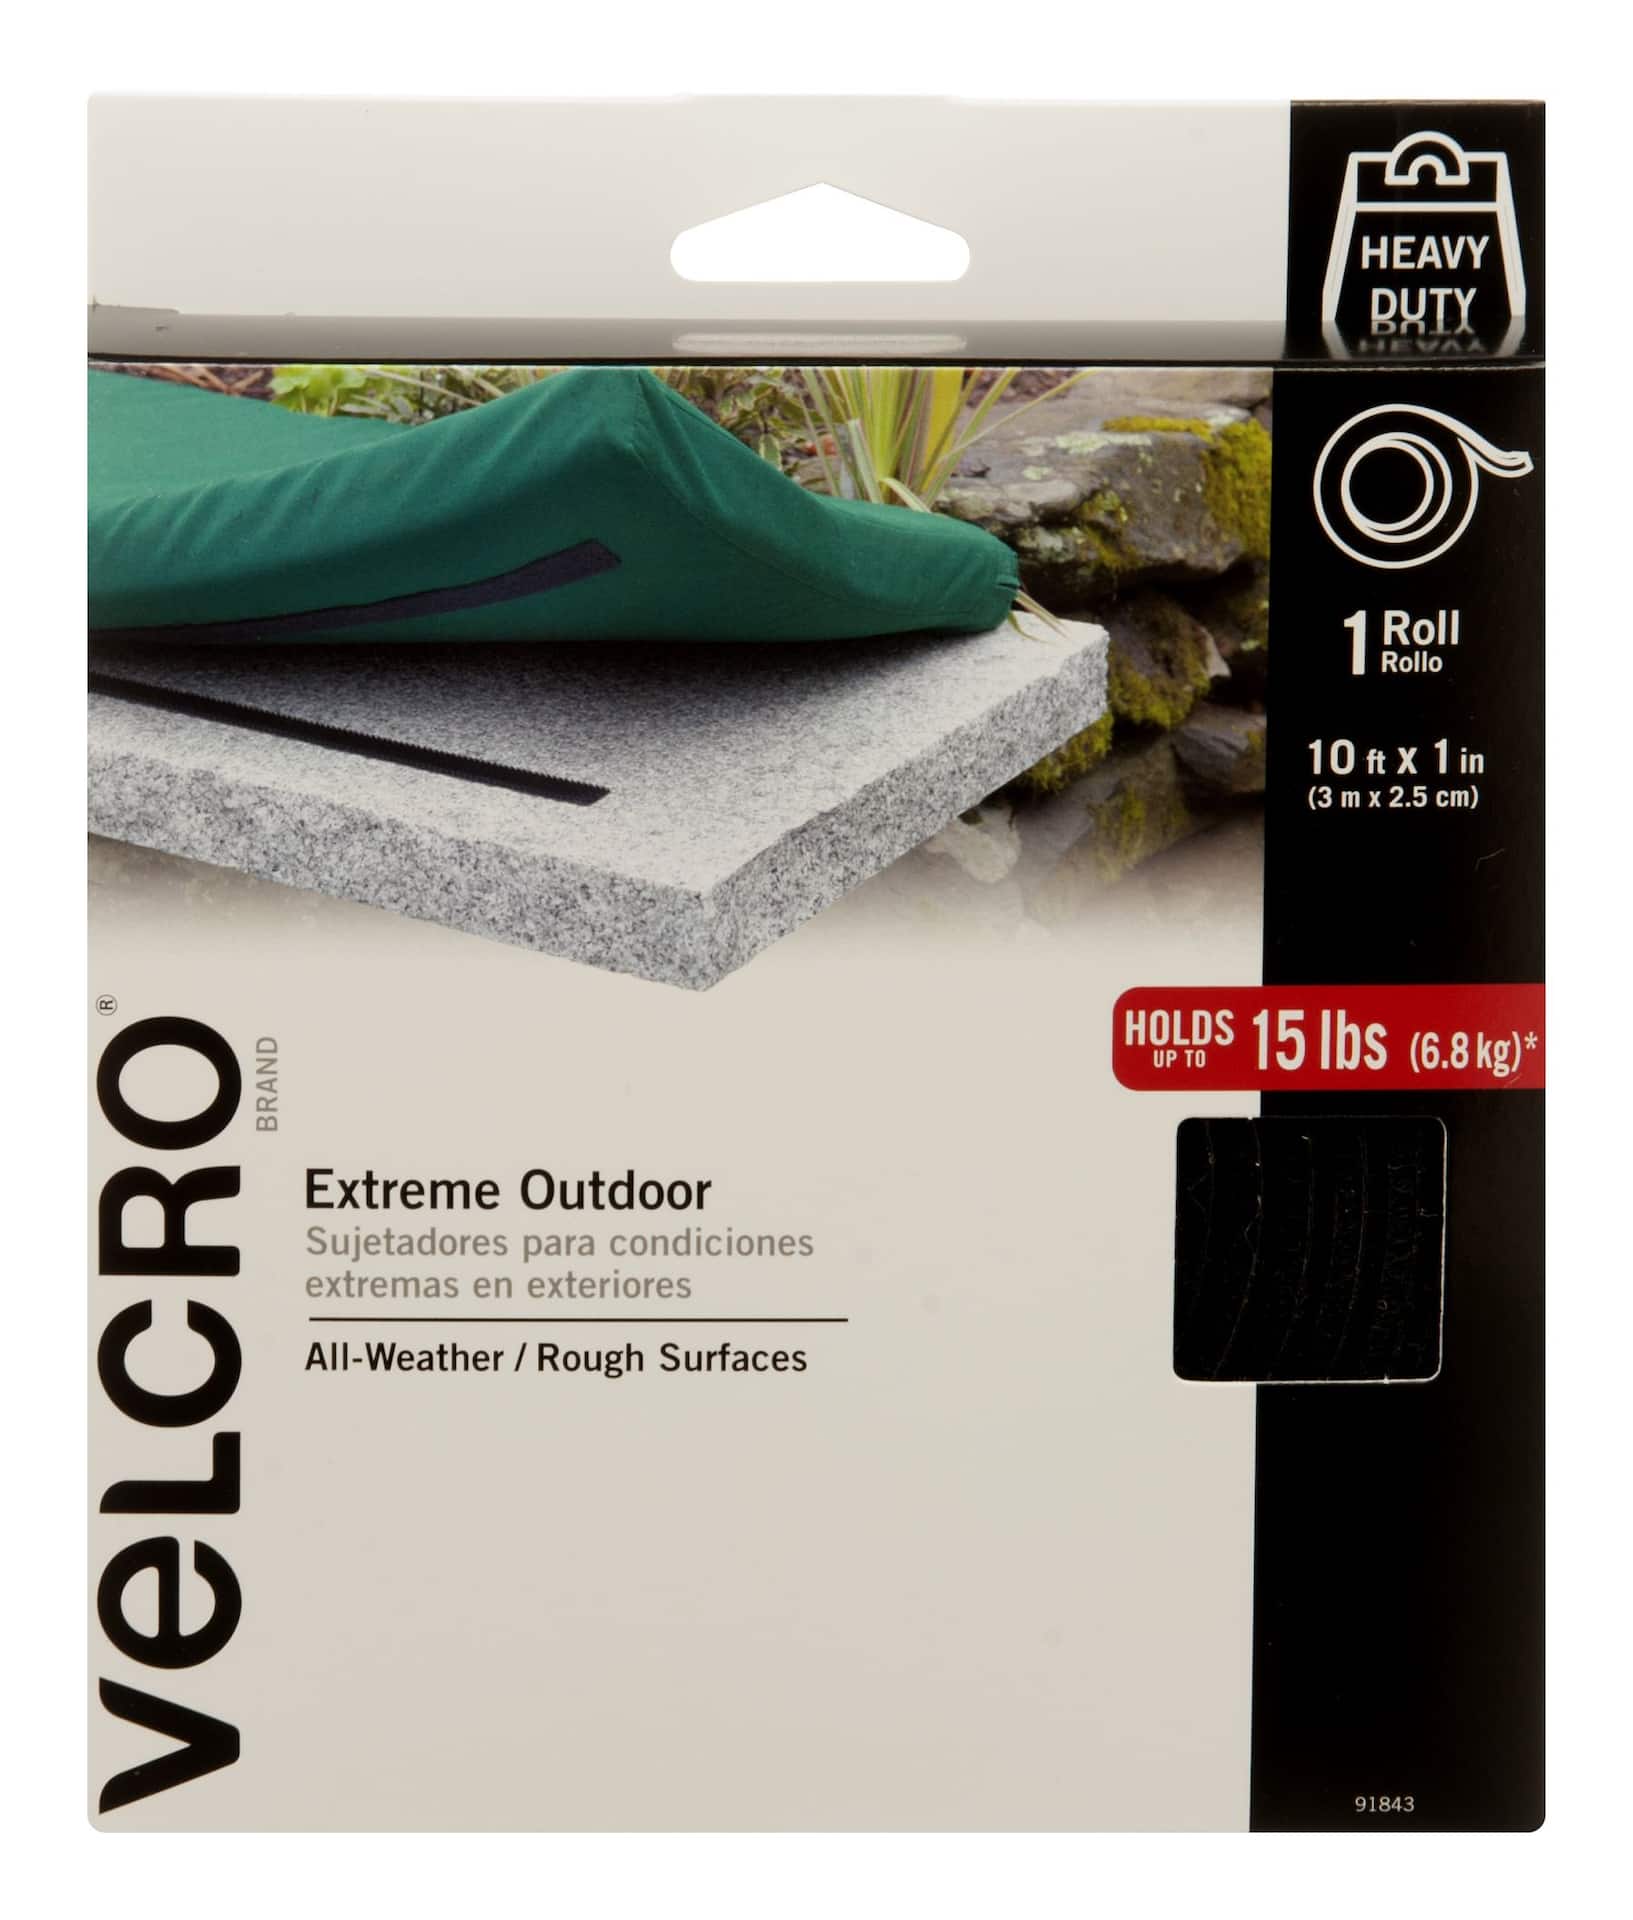 VELCRO Brand - Industrial Strength Extreme Outdoor, Heavy Duty, Superior  Holding Power on Rough Surfaces, 10 Stripes, 4in x 1in